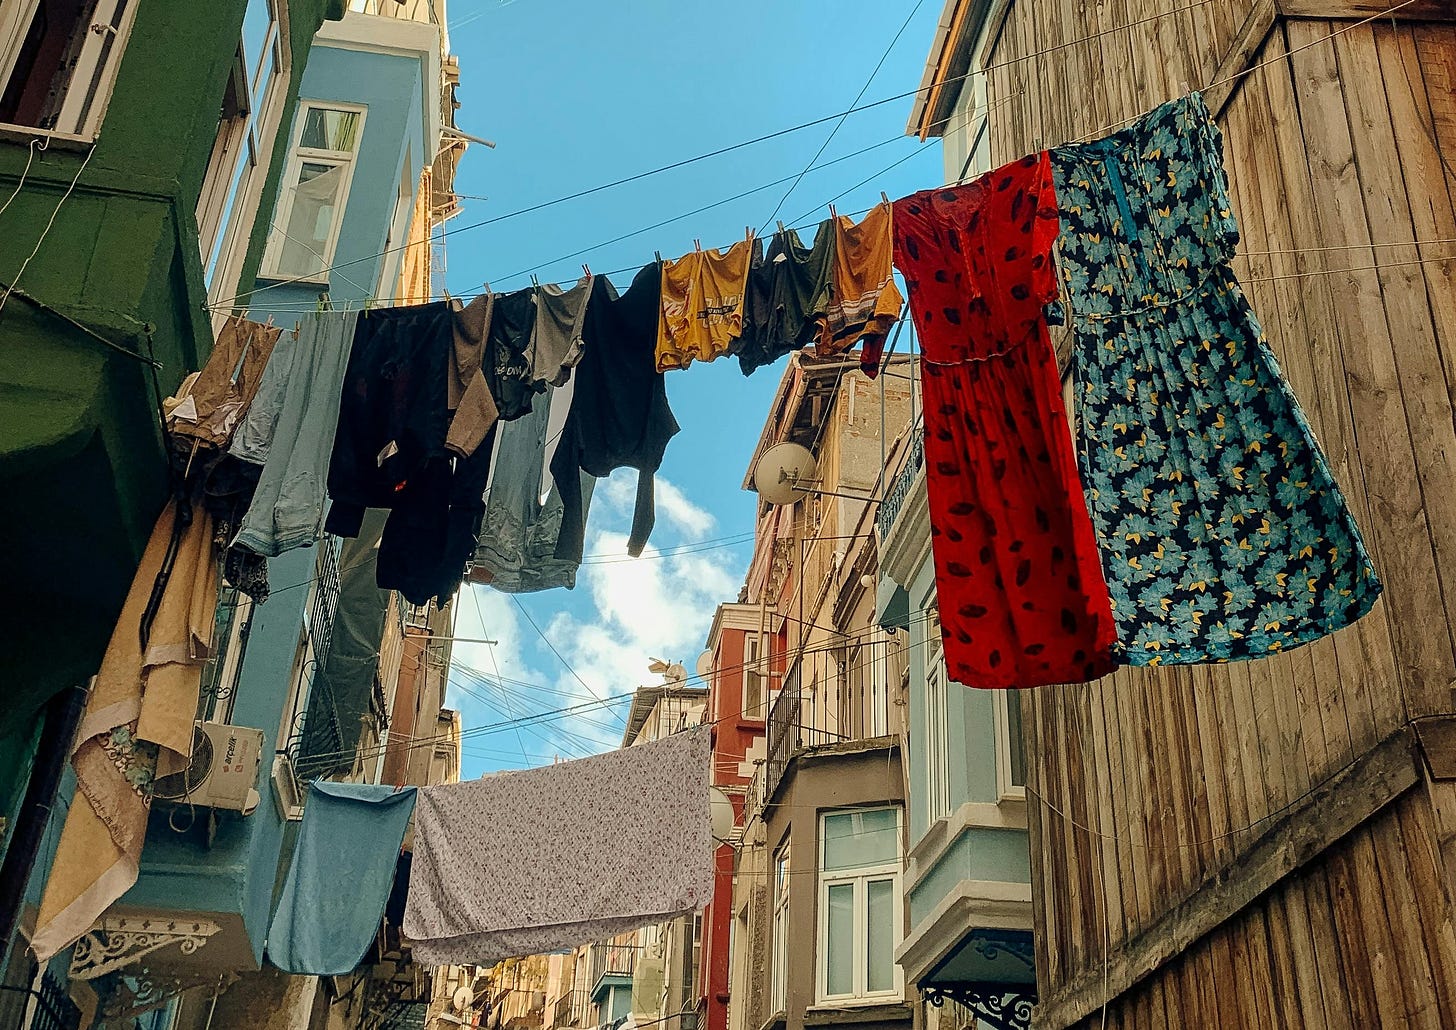 Clothes hanging lines between buildings on a narrow street